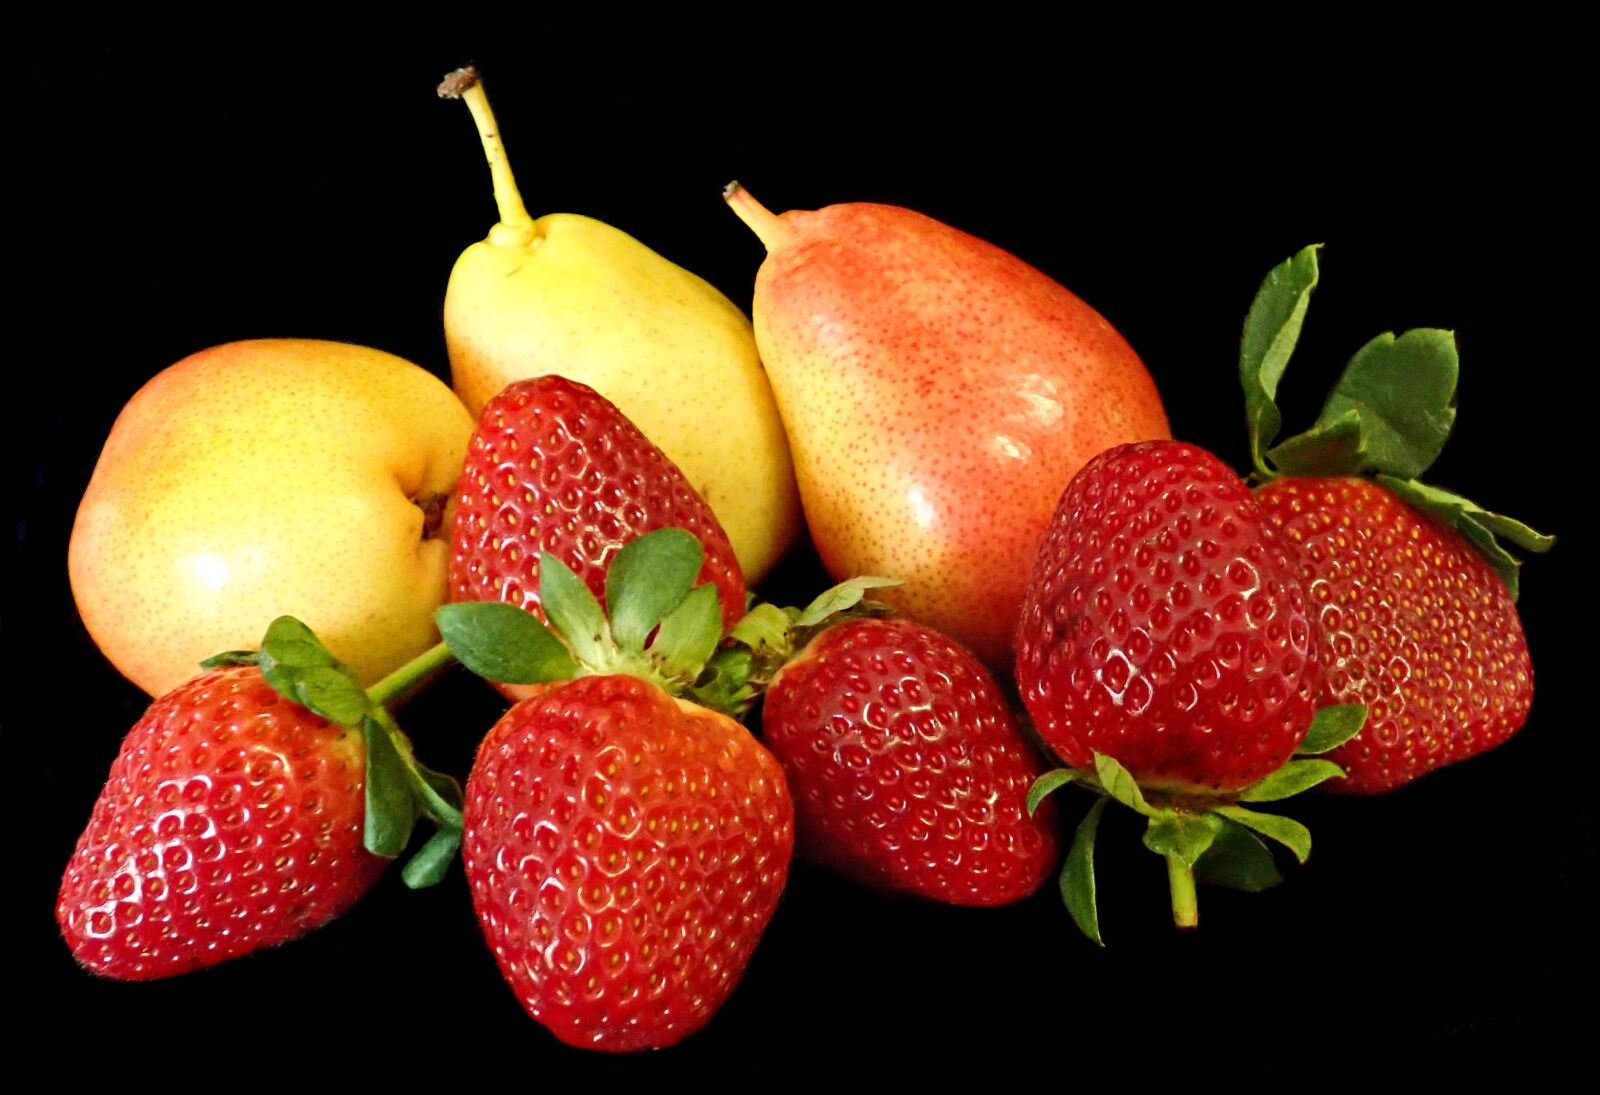 Olympus TG-5 sample photo. Fruits, pears, strawberries photography